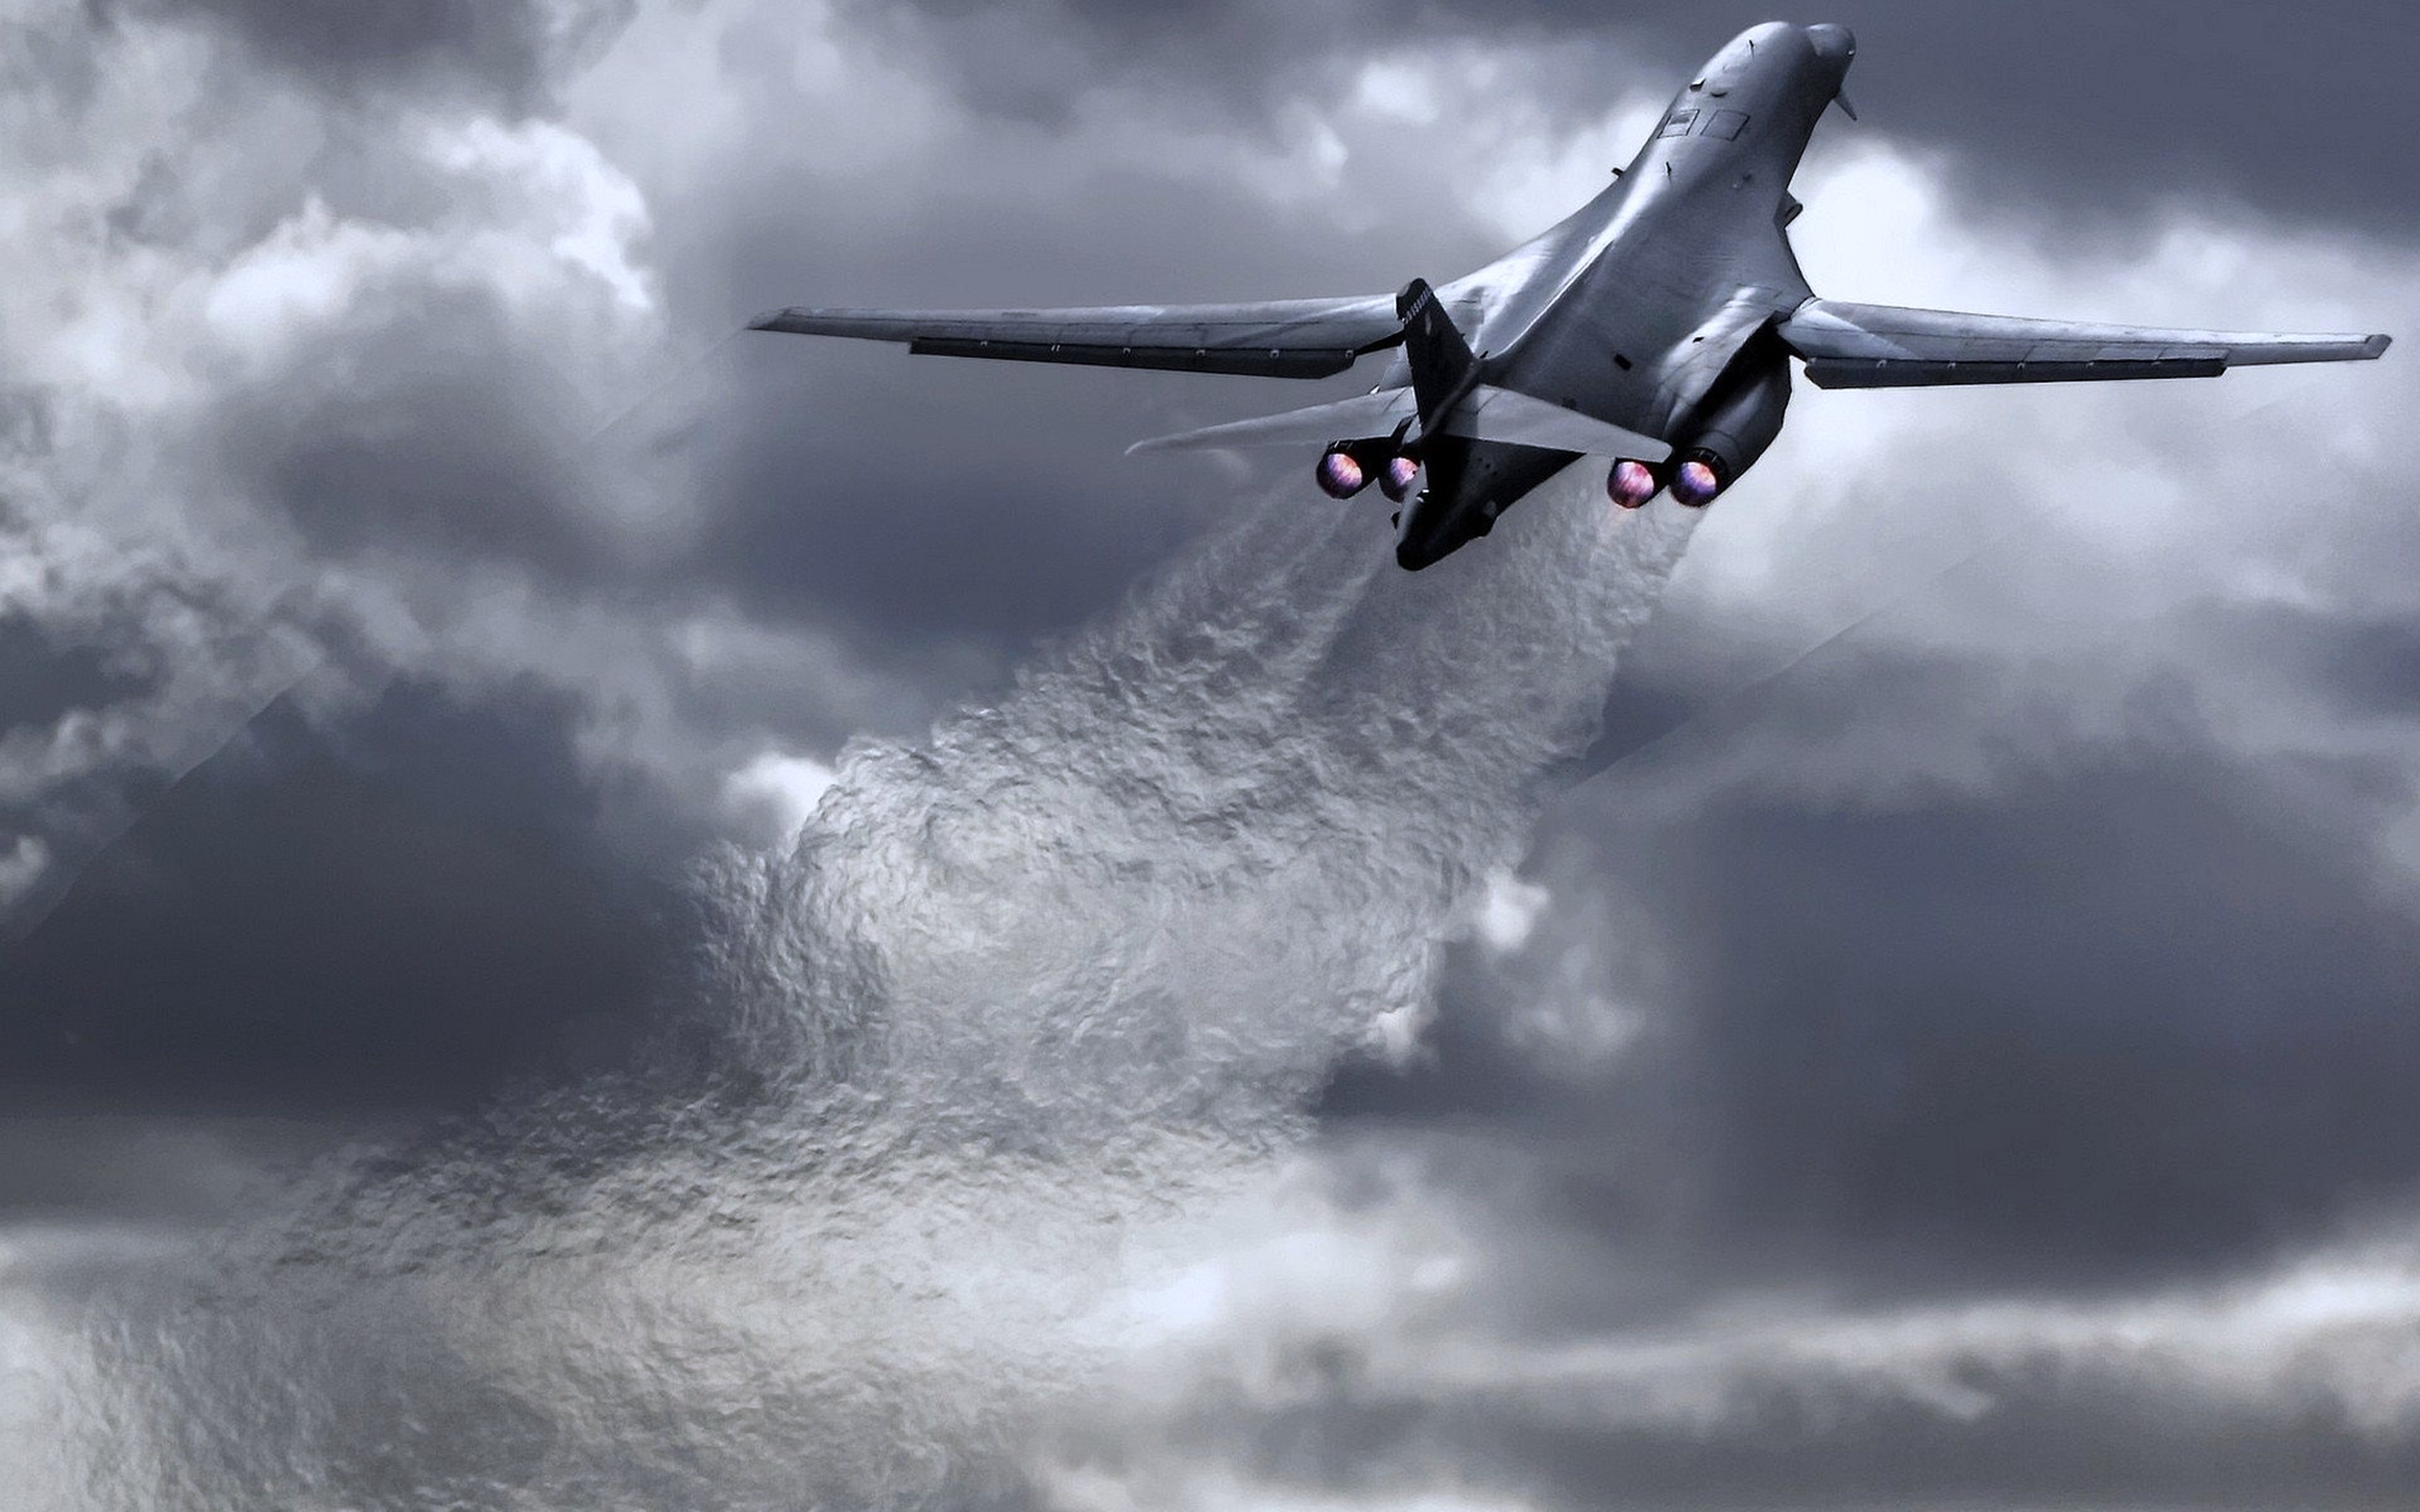 aircrafts, Attack, Bombing, Clouds, Earth, Flights, Landscapes, Military, Nature, Review, Sky, Warplanes Wallpaper